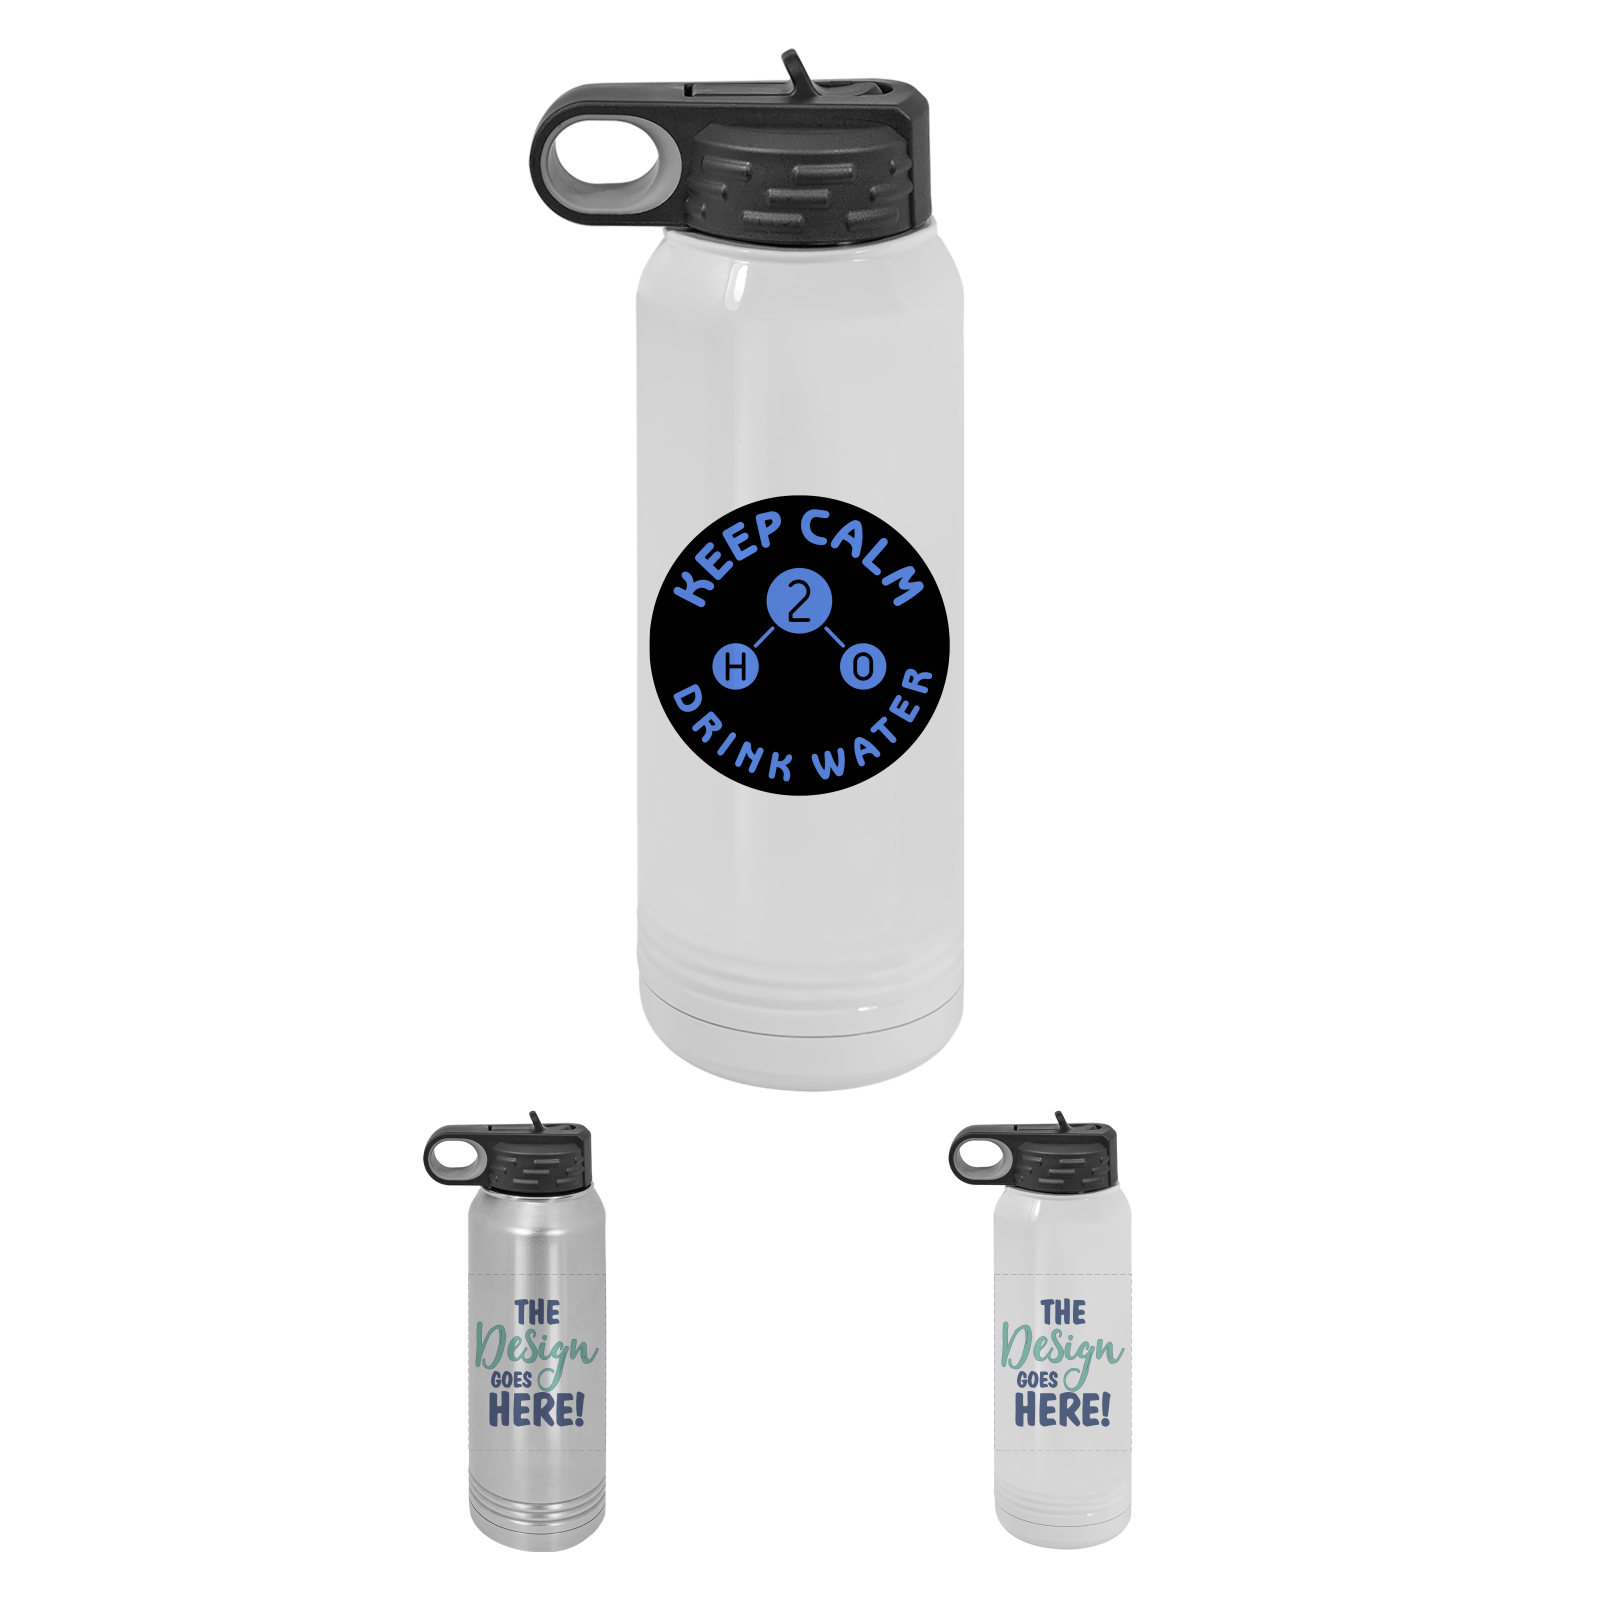 https://giftworkspremium.com/wp-content/uploads/2022/06/G-WBL1-2-30oz.-Stainless-Steel-Water-Bottle-EXAMPLE-PIC.png